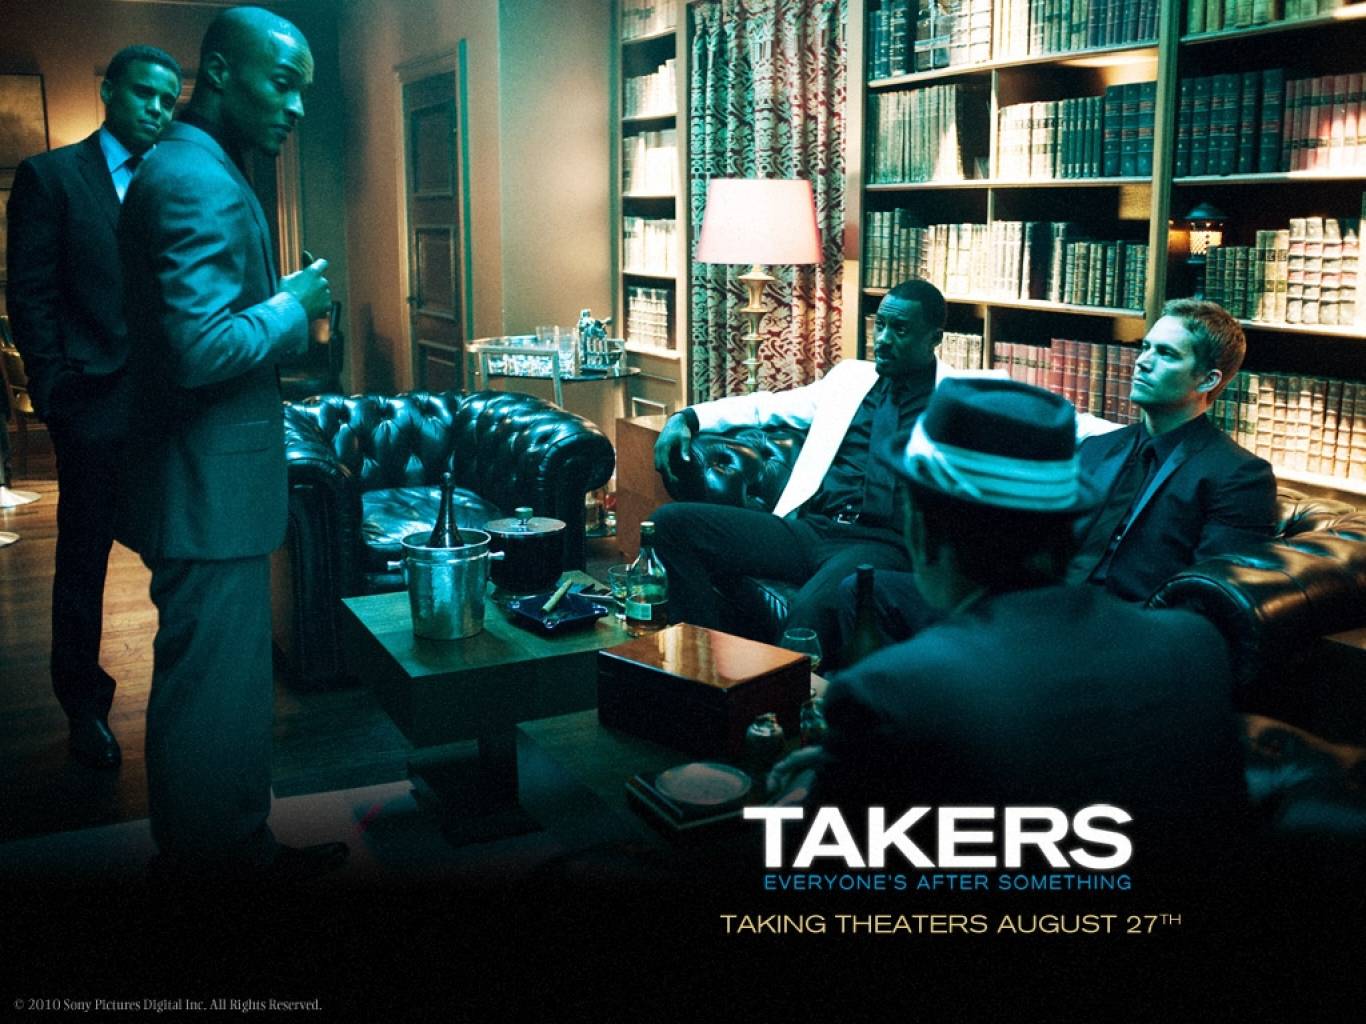 Takers Movie HD Wallpaper. Takers HD Movie Wallpaper Free Download (1080p to 2K)